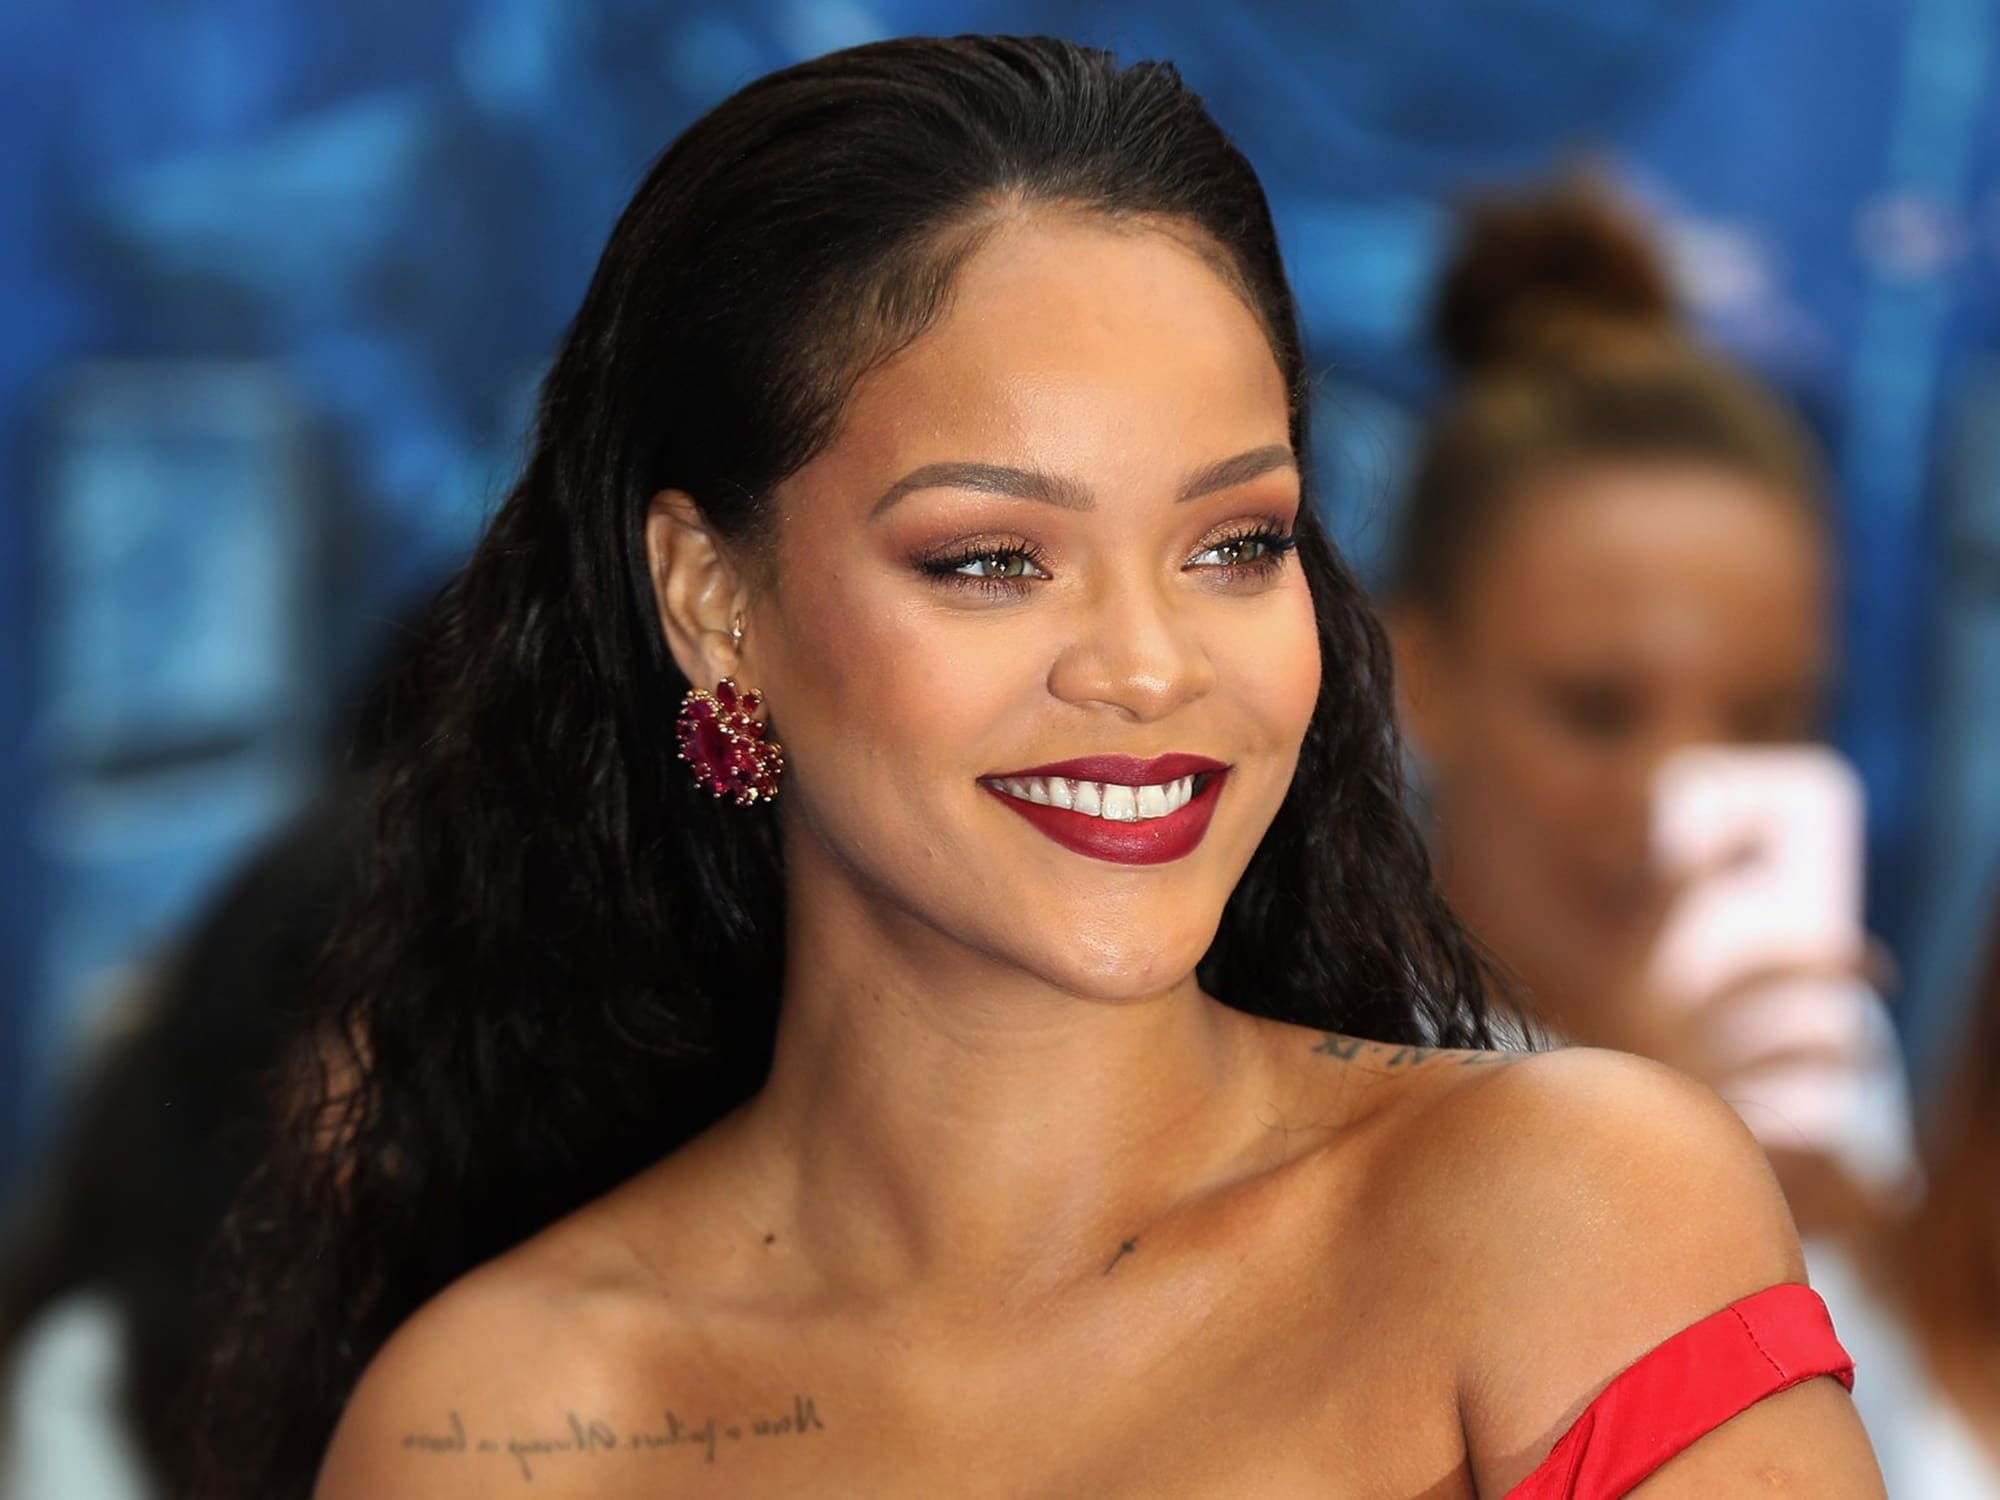 Rihanna Breaks The Internet In Tight Black Outfit Playing A Maid As She ...